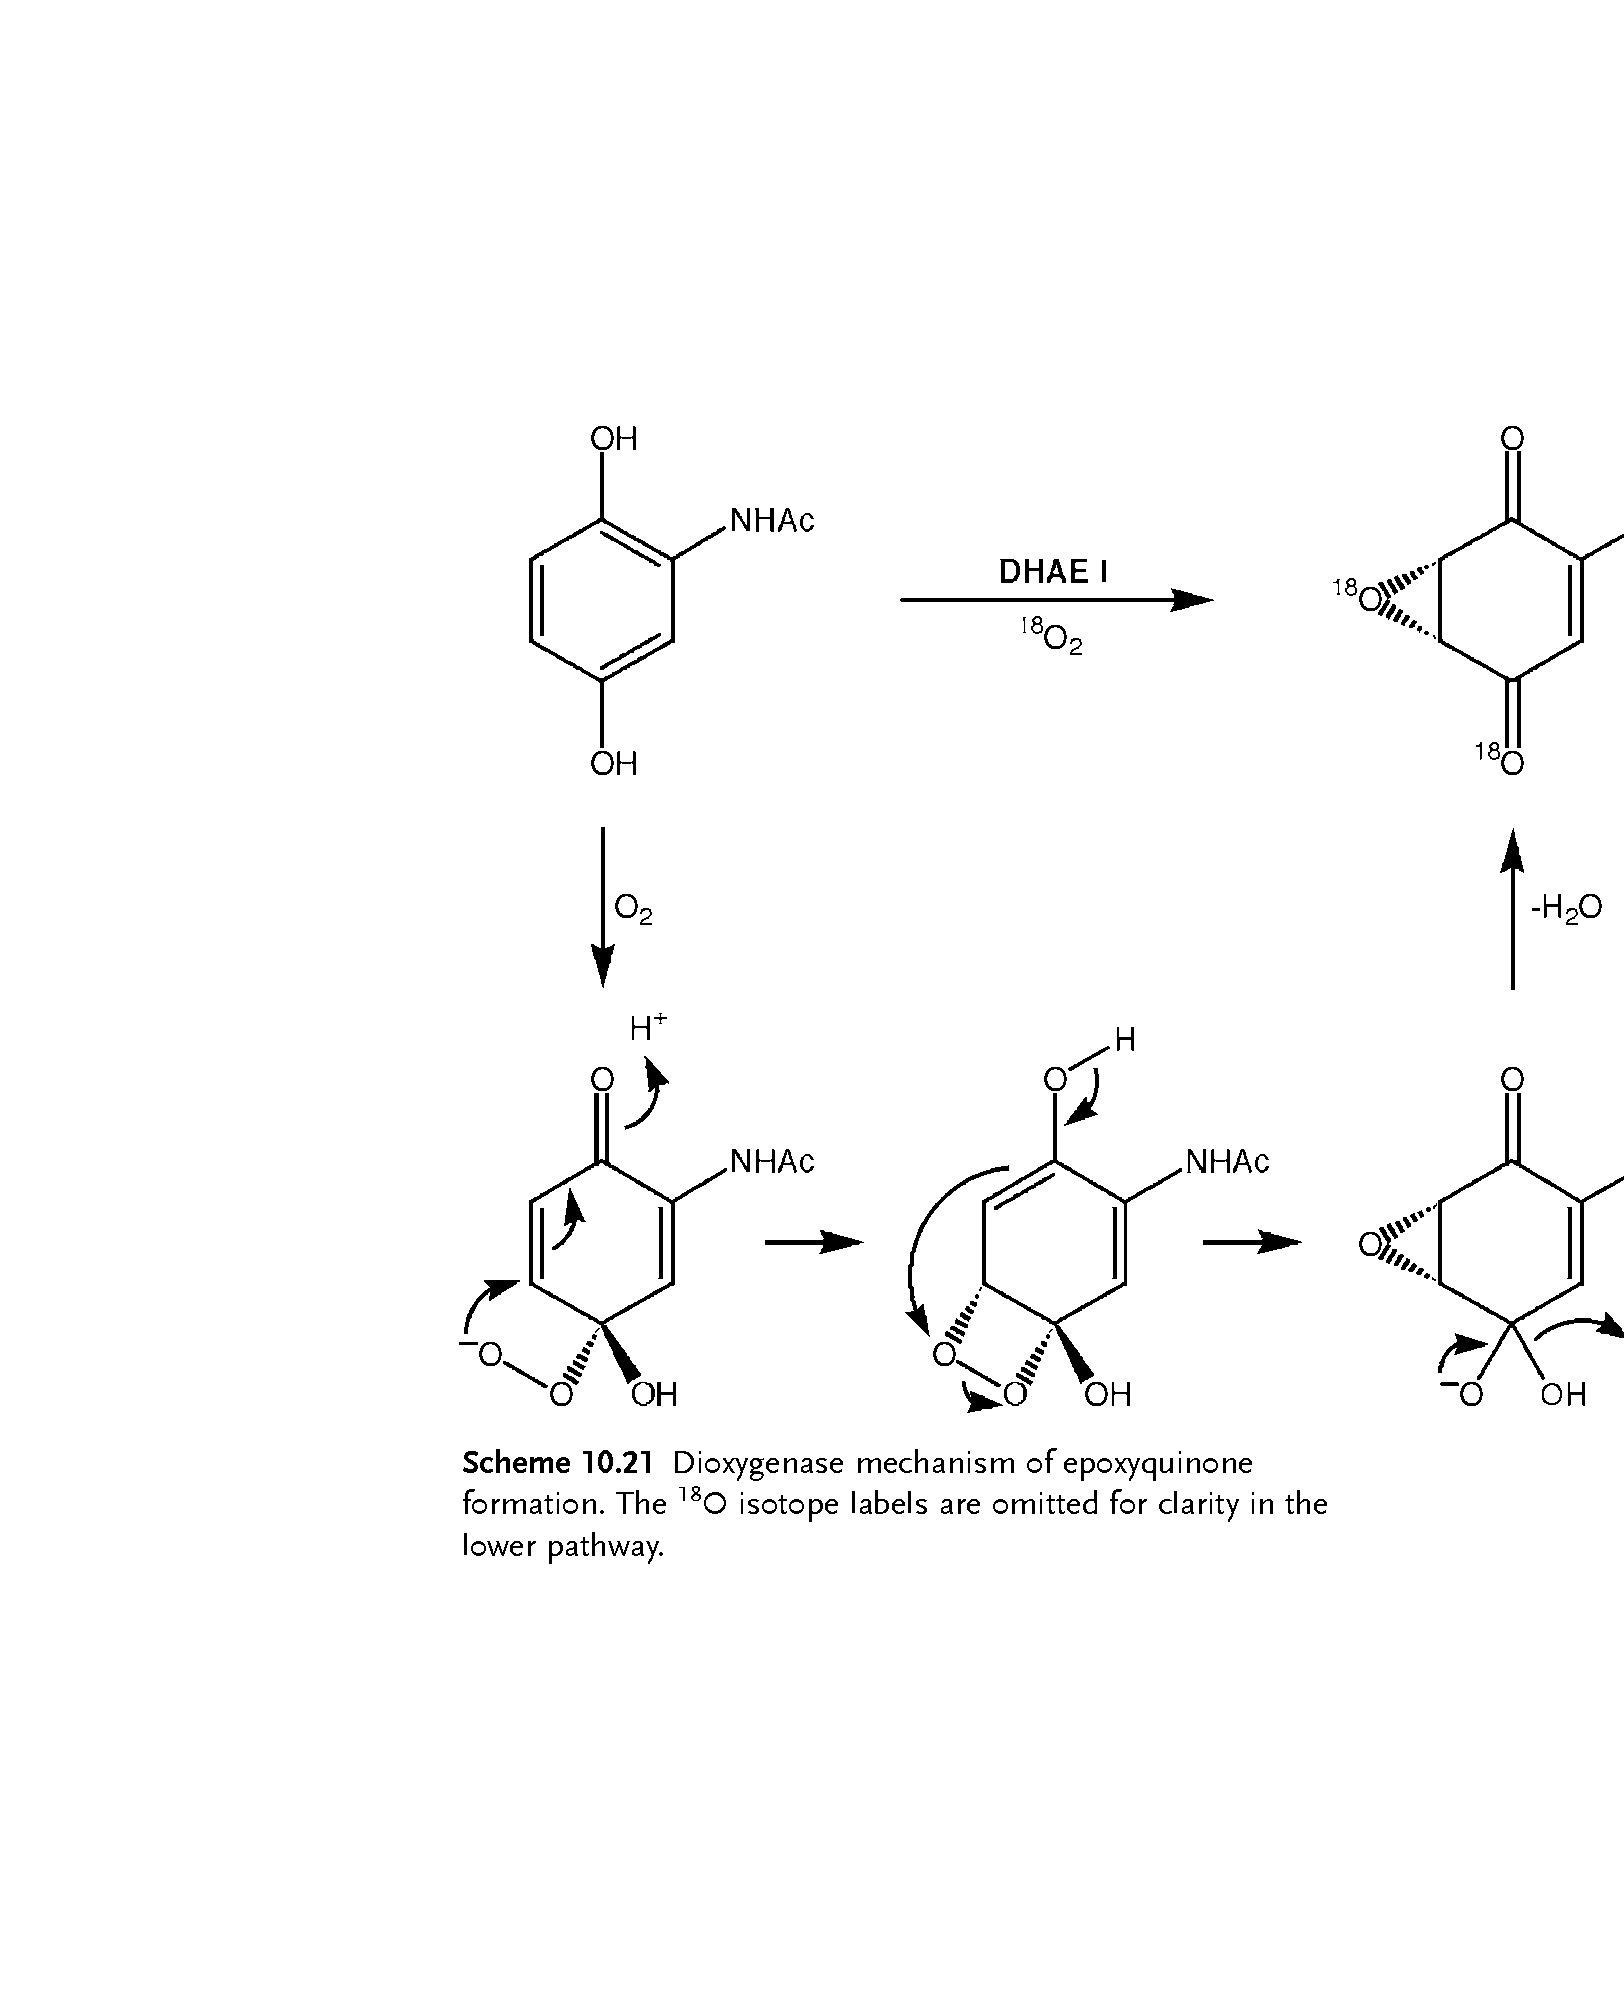 Scheme 10.21 Dioxygenase mechanism of epoxyquinone formation. The 180 isotope labels are omitted for clarity in the lower pathway.